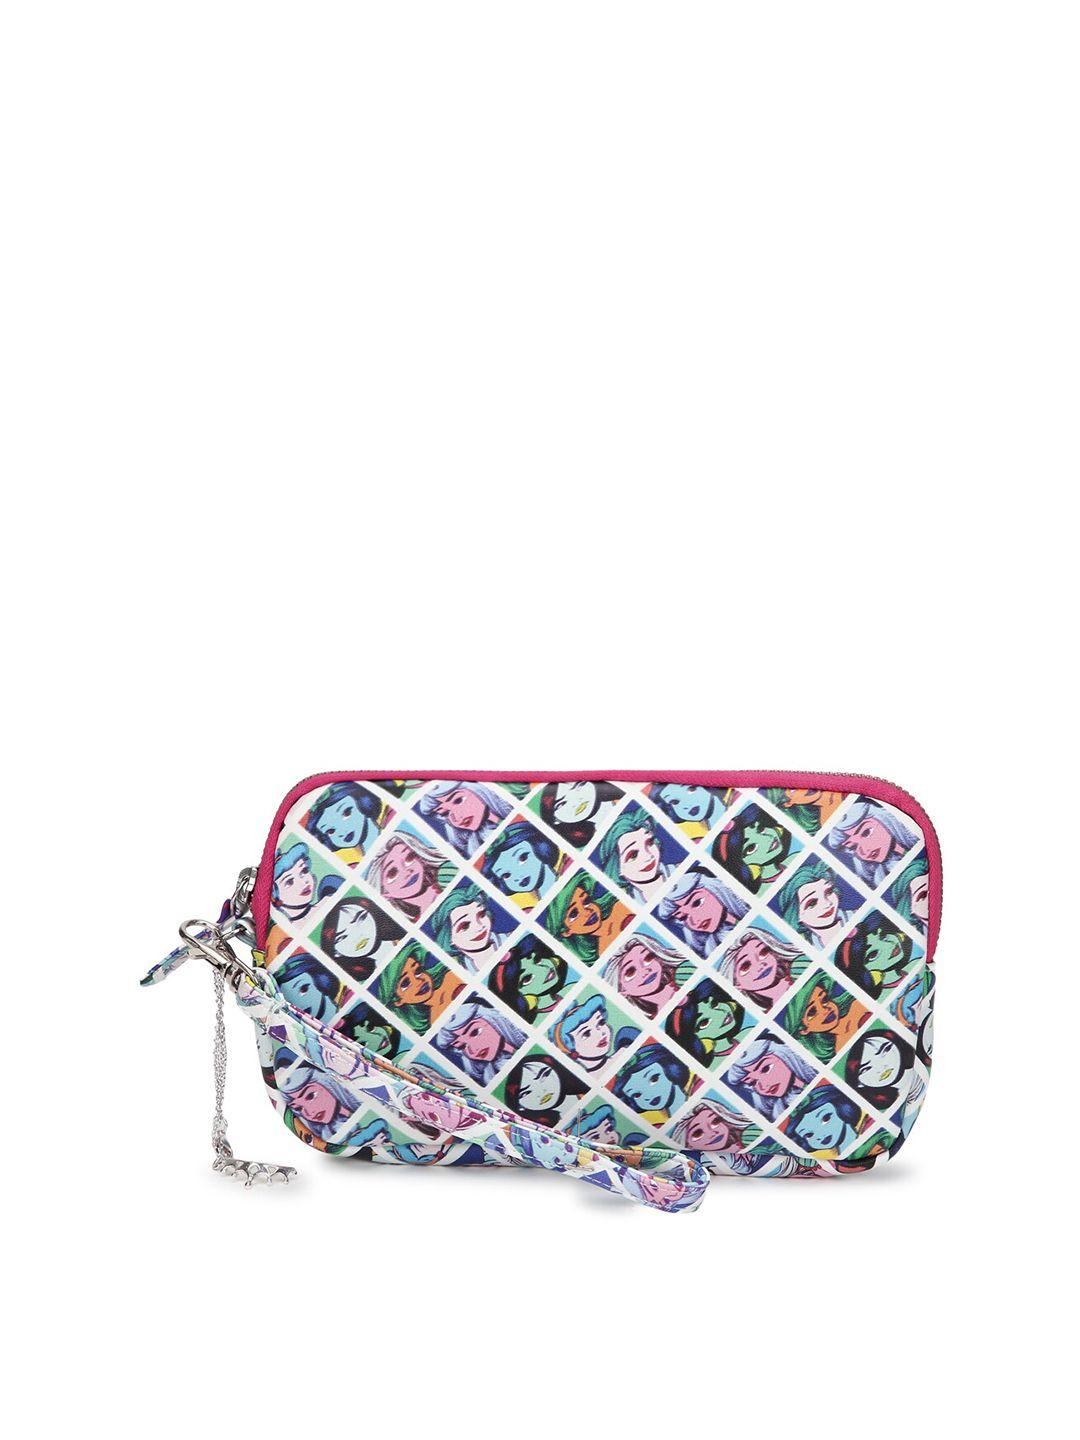 forever 21 white & pink printed purse clutch